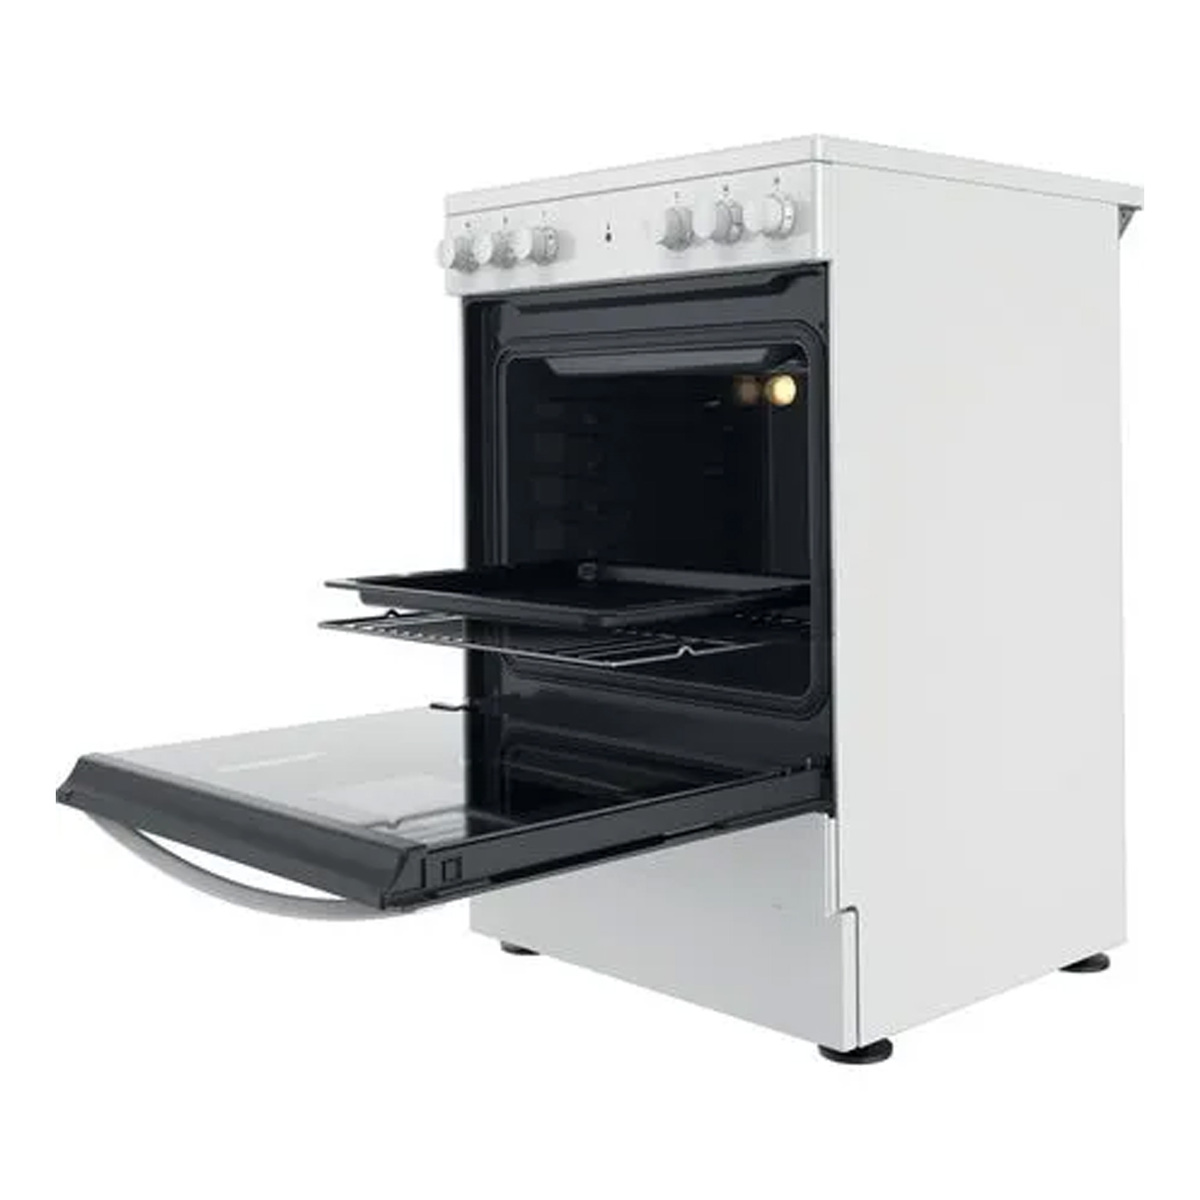 Indesit Cermaic Cooker, 4 Plates, 60 x 60 cm, White, IS67V5KHW